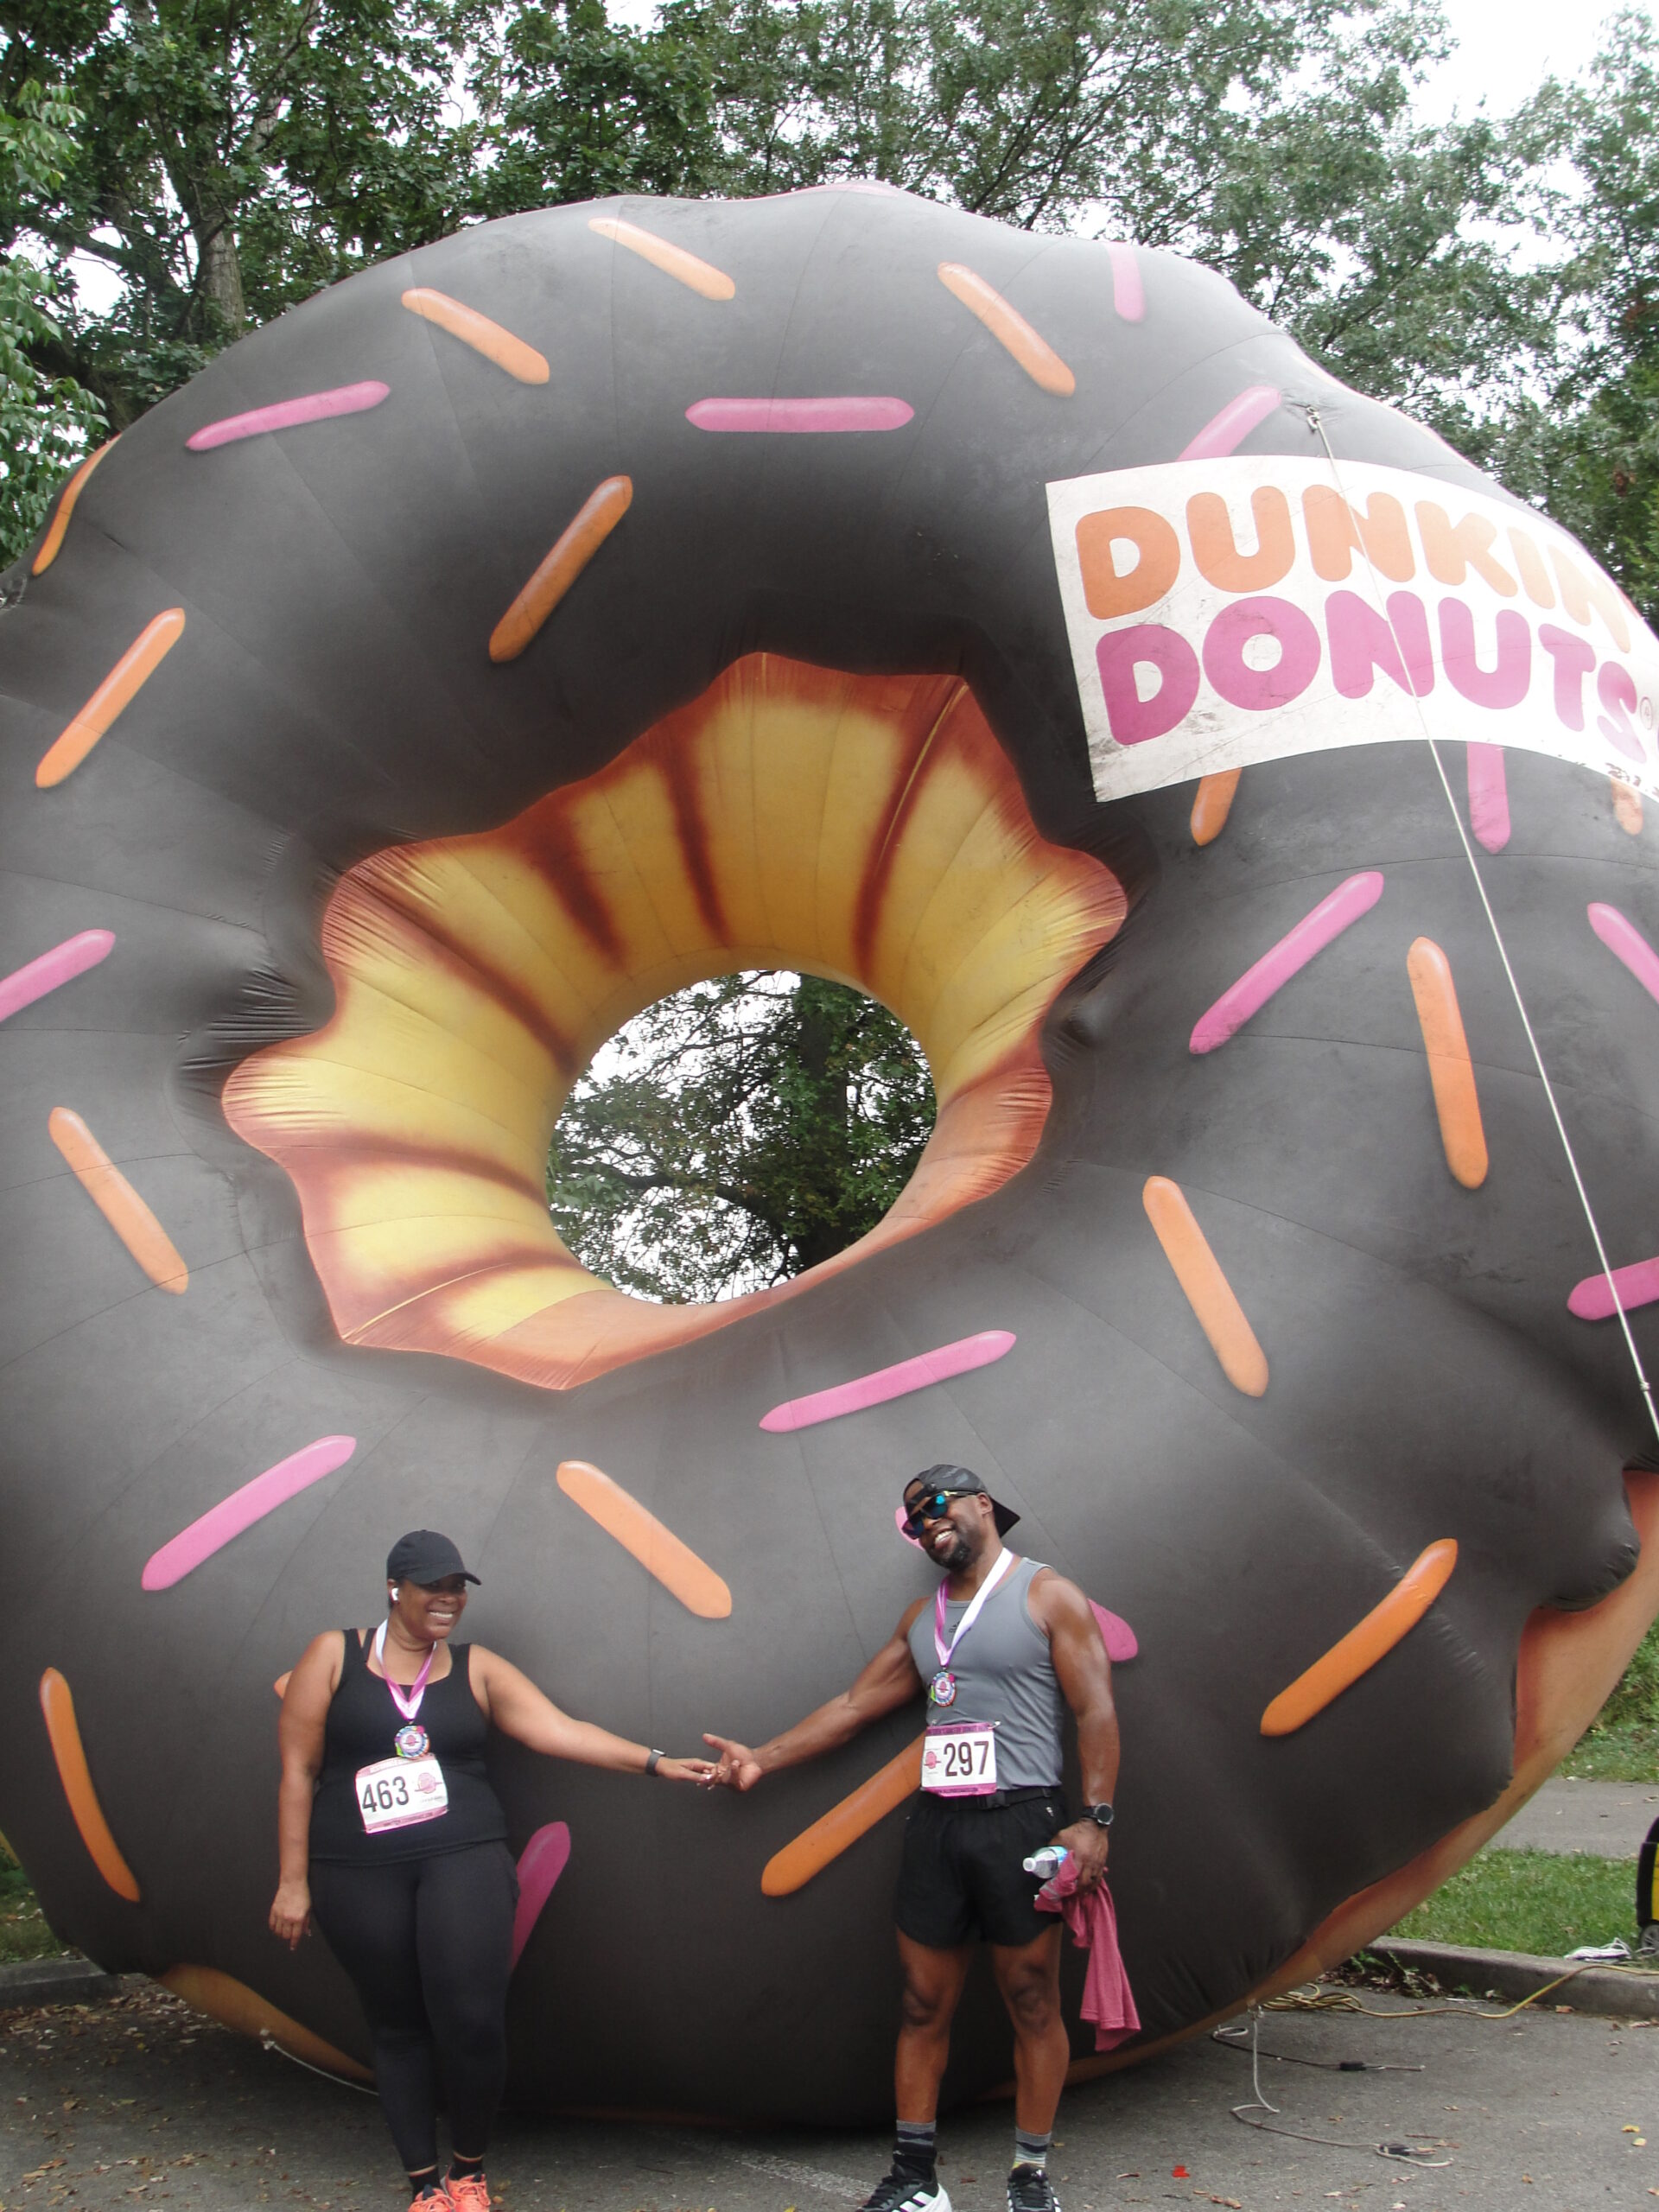 Participants and Finishers - Giant Inflatable Donut -Westerville Donut Run - Columbus Donut Run - USA Race Timing & Event Management - Special Event Rentals - https://www.specialevent-rentals.com/ - https://runsignup.com/Race/OH/Columbus/ColumbusDonutRun - https://www.facebook.com/ColumbusDonutRun/